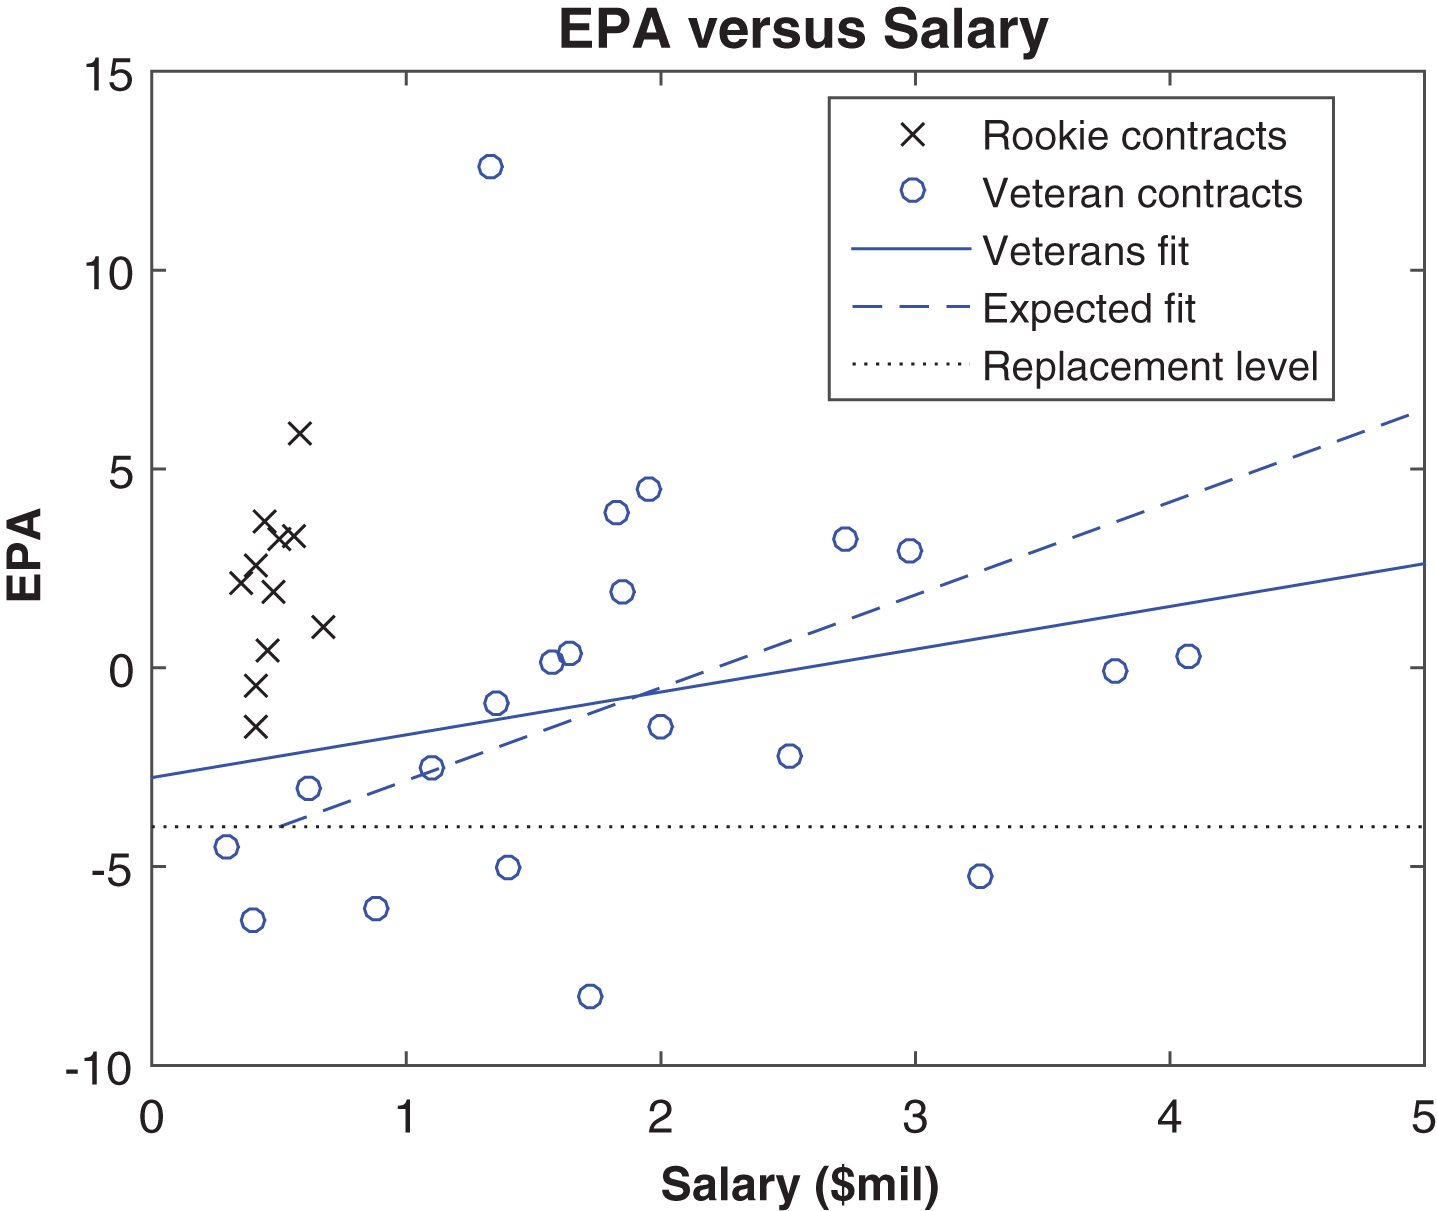 EPA and salaries (“cap hit” value) in 2013, by contract status.